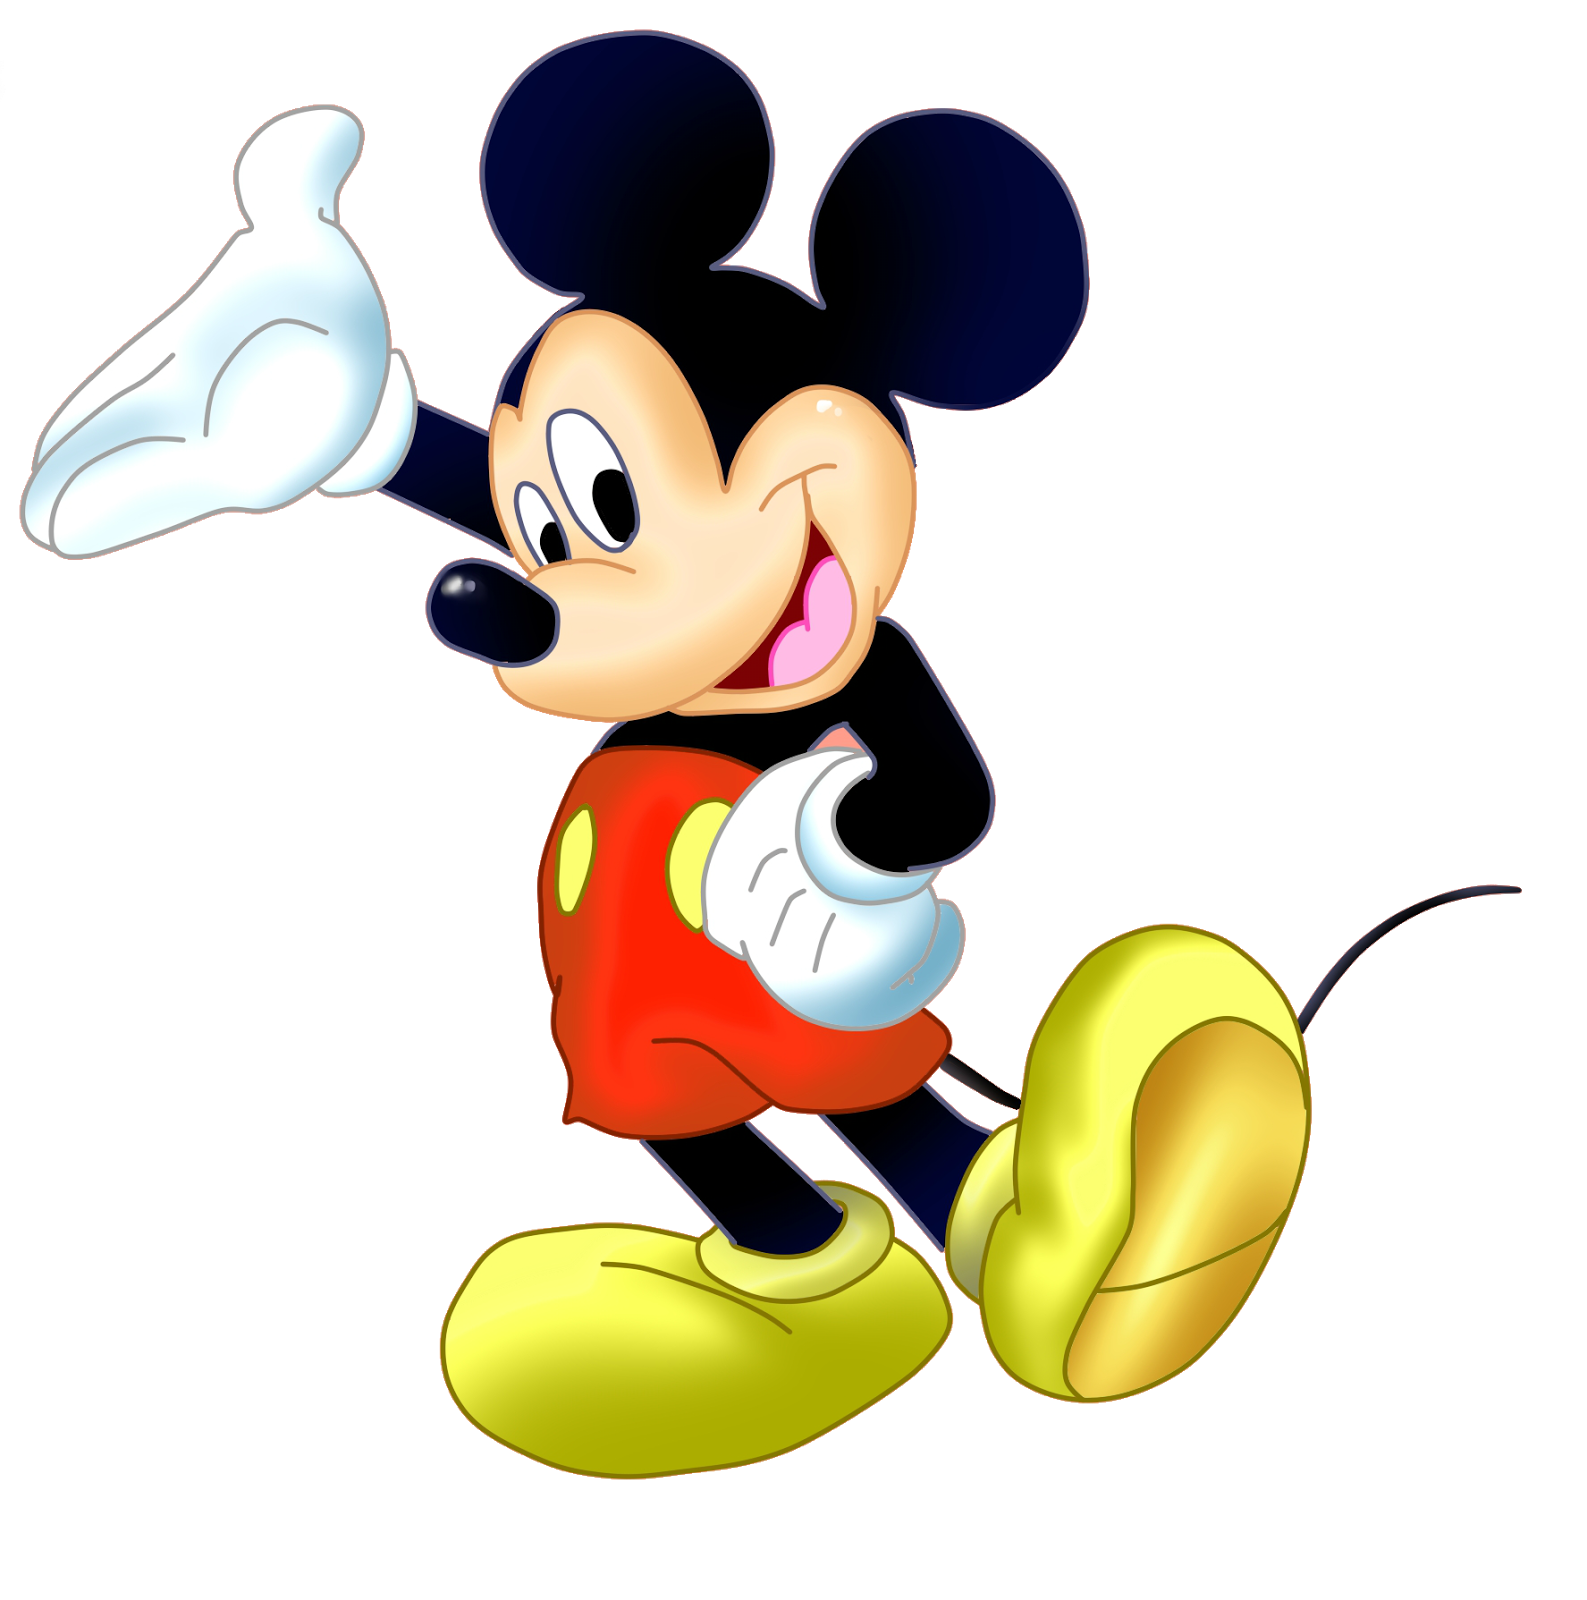 Free download. Mickey mouse png images